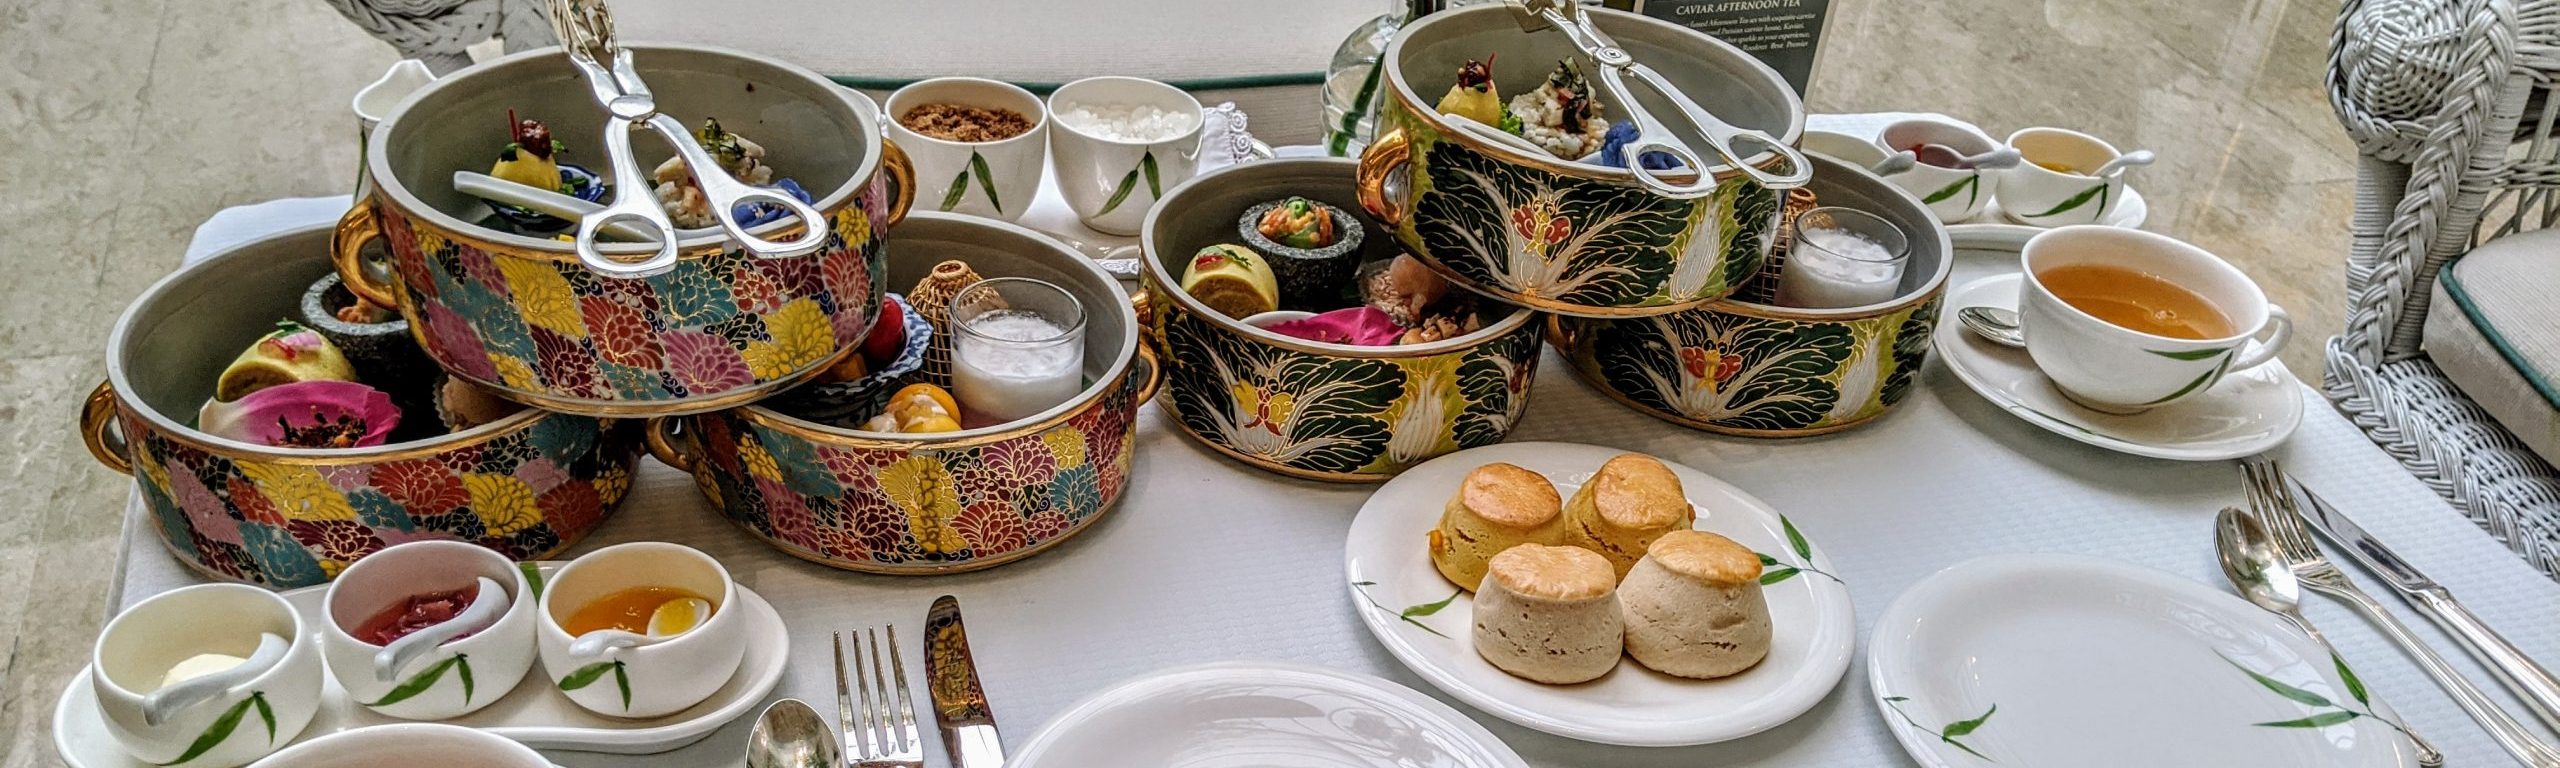 Mandarin Oriental, Bangkok - 'La Grande Dame' Tea by Mariage Frères,  exclusively for Mandarin Oriental, Bangkok. An elixir of poetry and  refinement. #authorslounge, #afternoontea, #oriental140